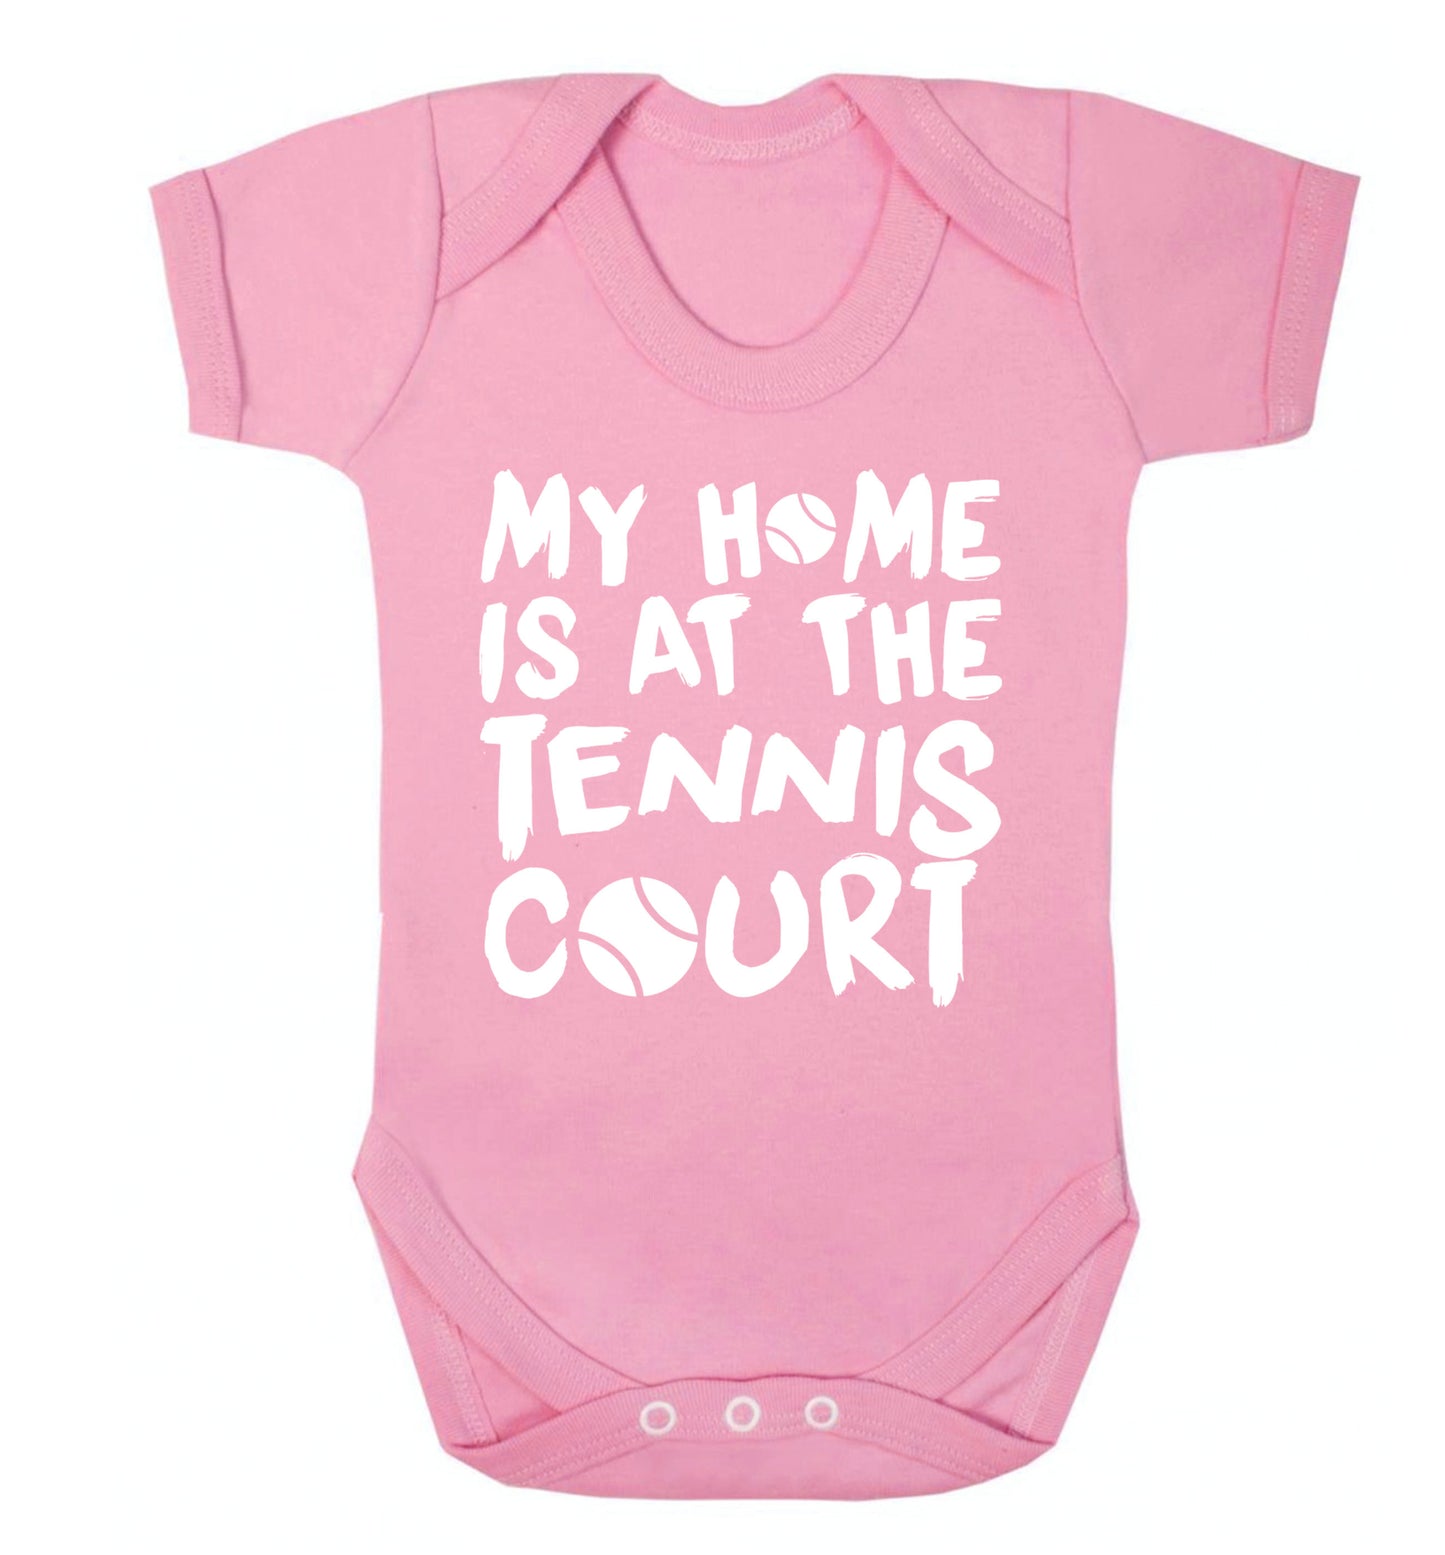 My home is at the tennis court Baby Vest pale pink 18-24 months